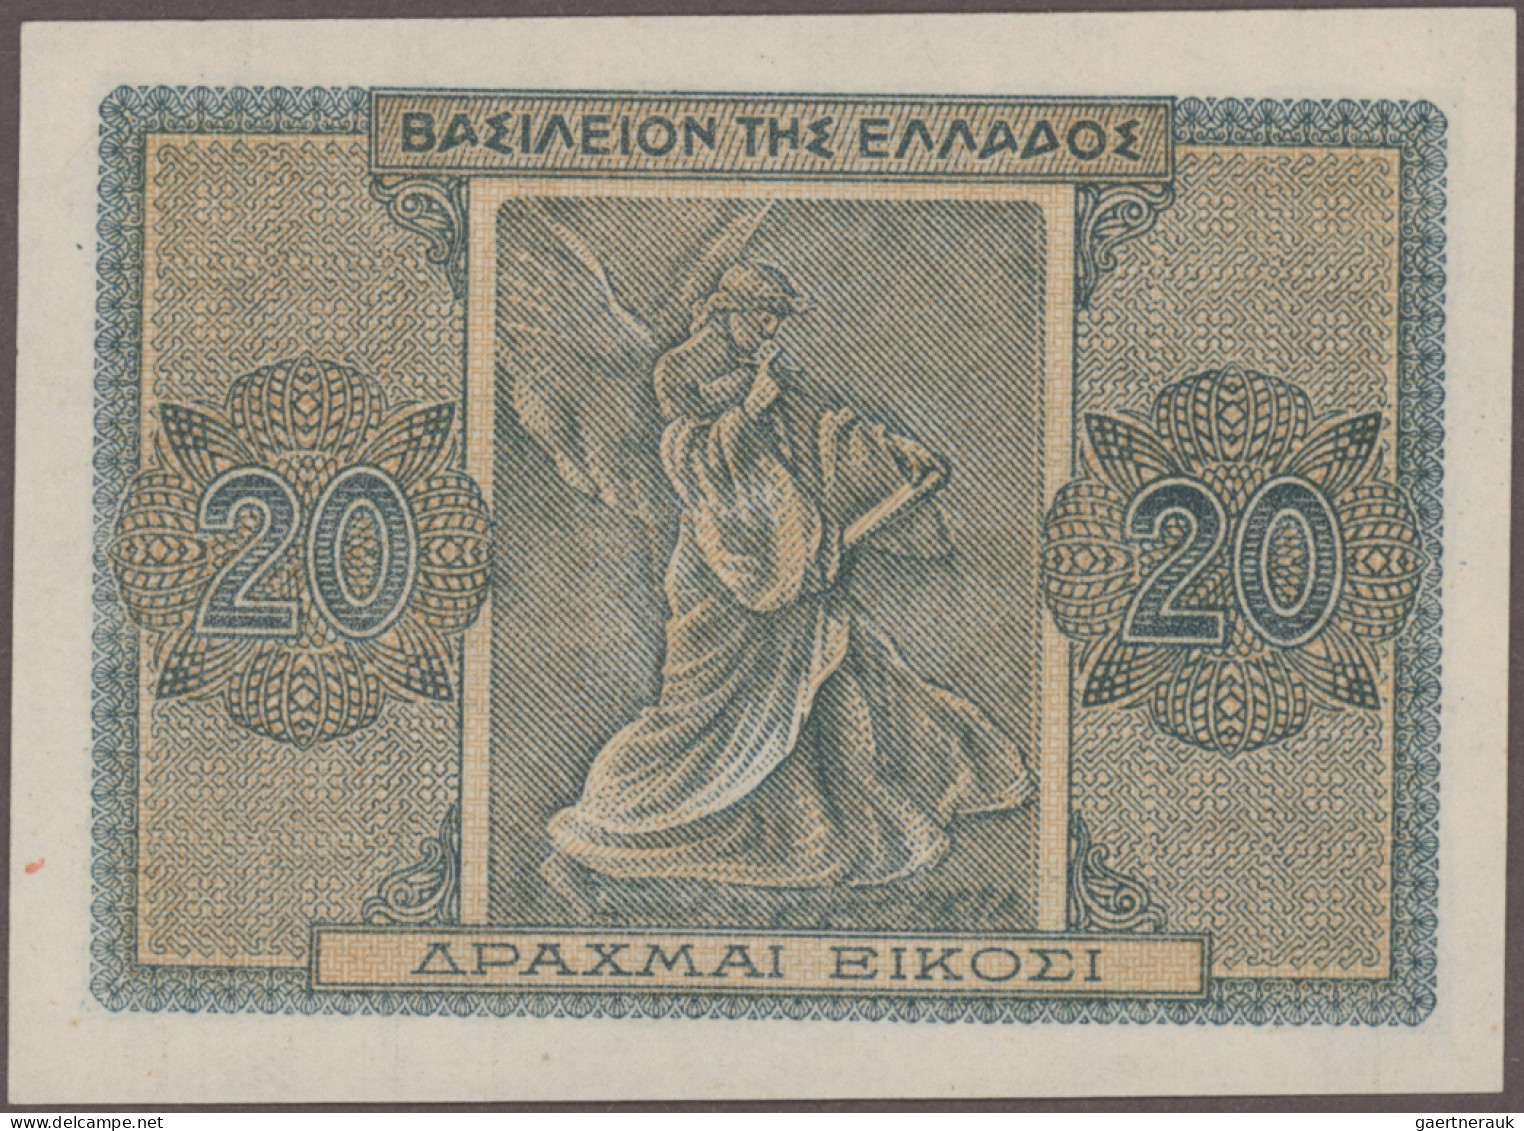 Greece: Kingdom of Greece, very nice set with 17 banknotes, series 1918-1953, co